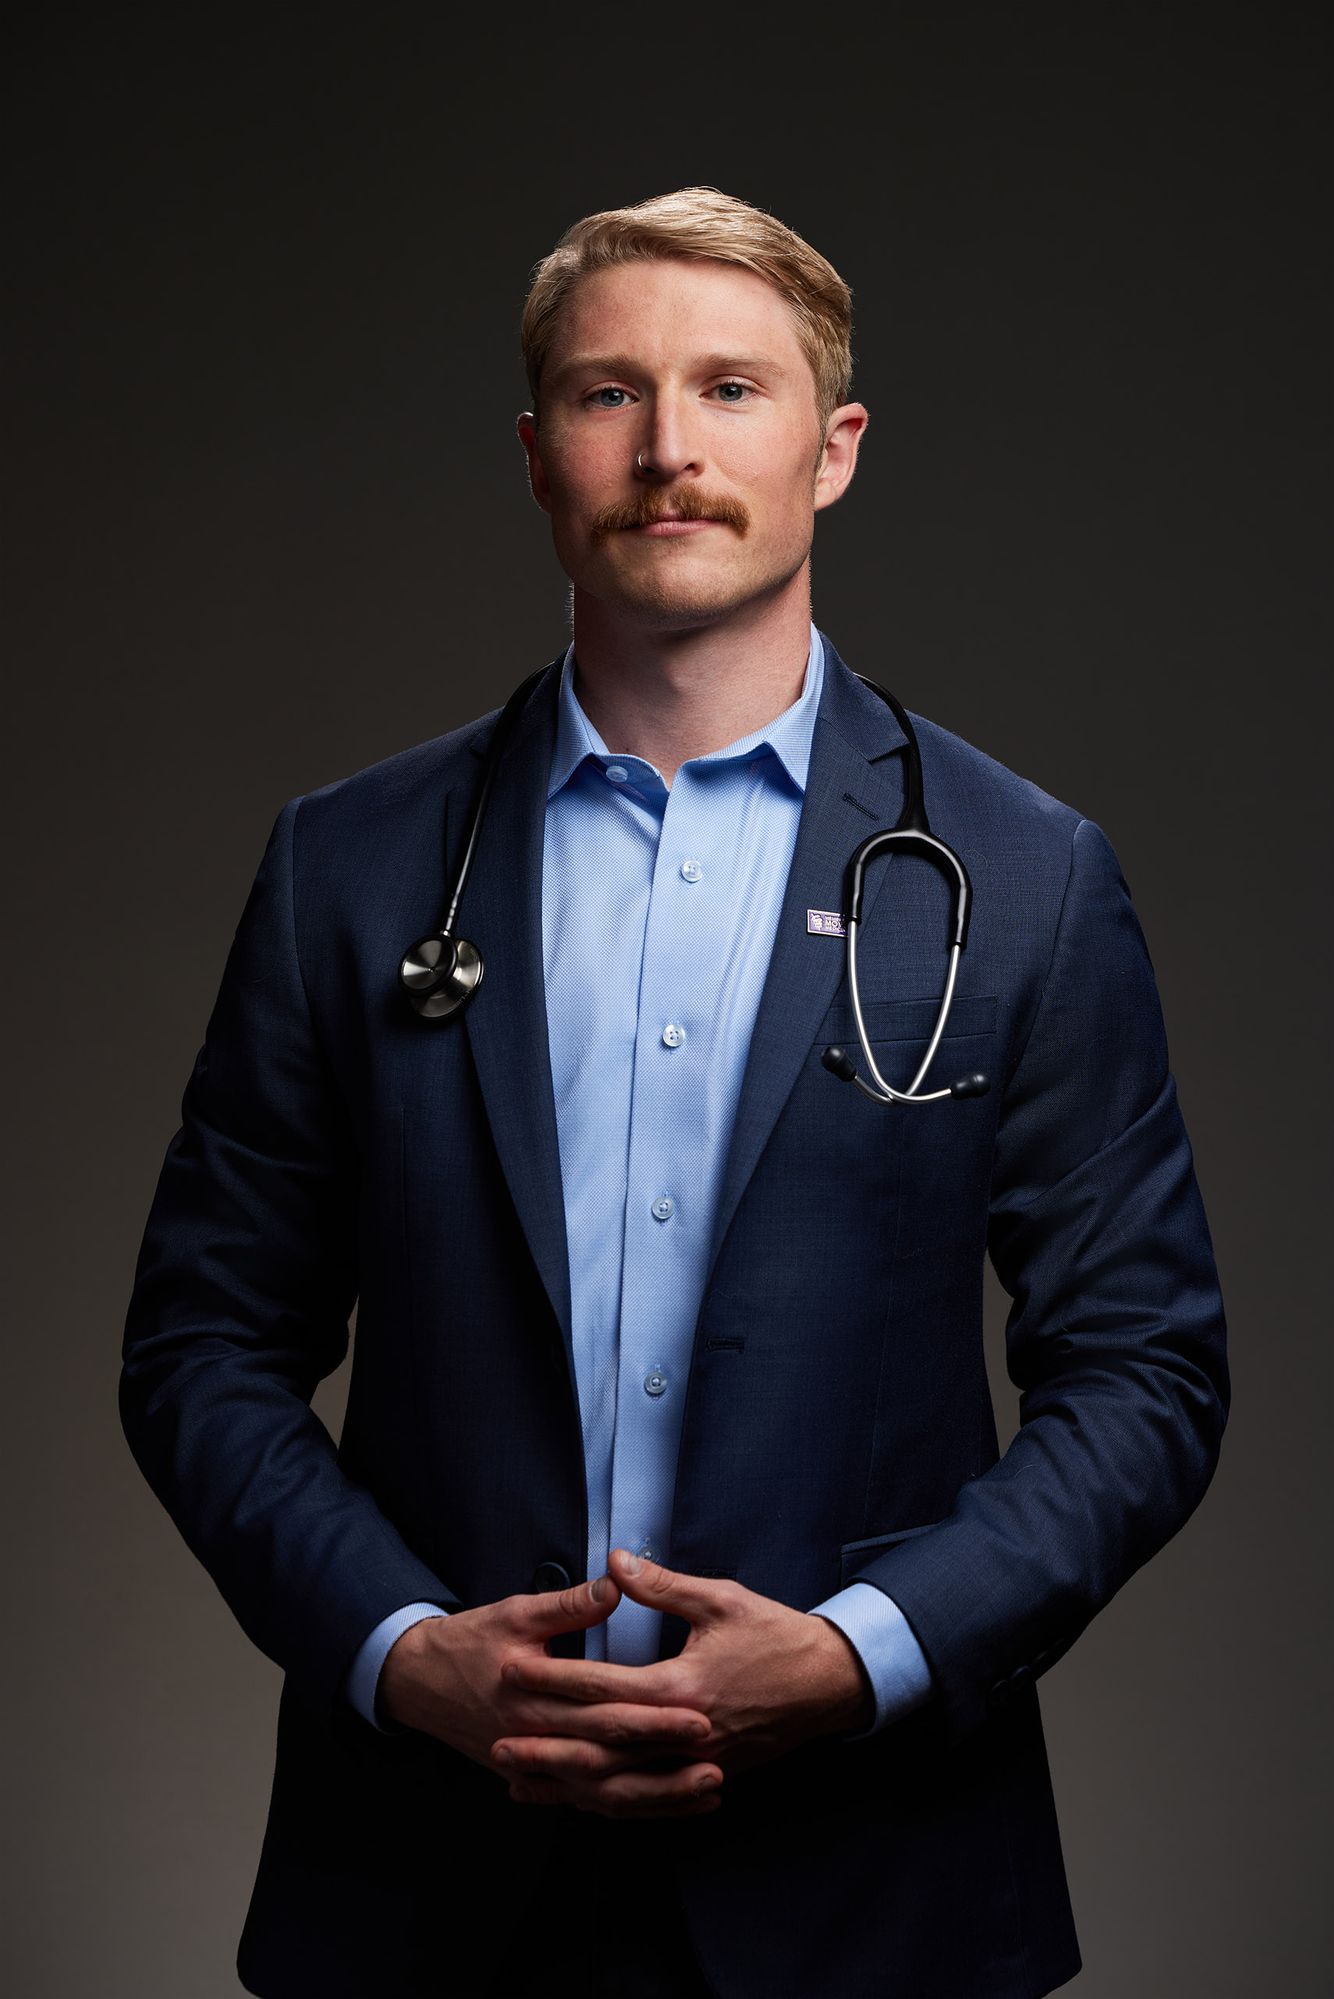 AMA Doctor Portrait Photograph by Chicago healthcare advertising photographer Jeff Schear